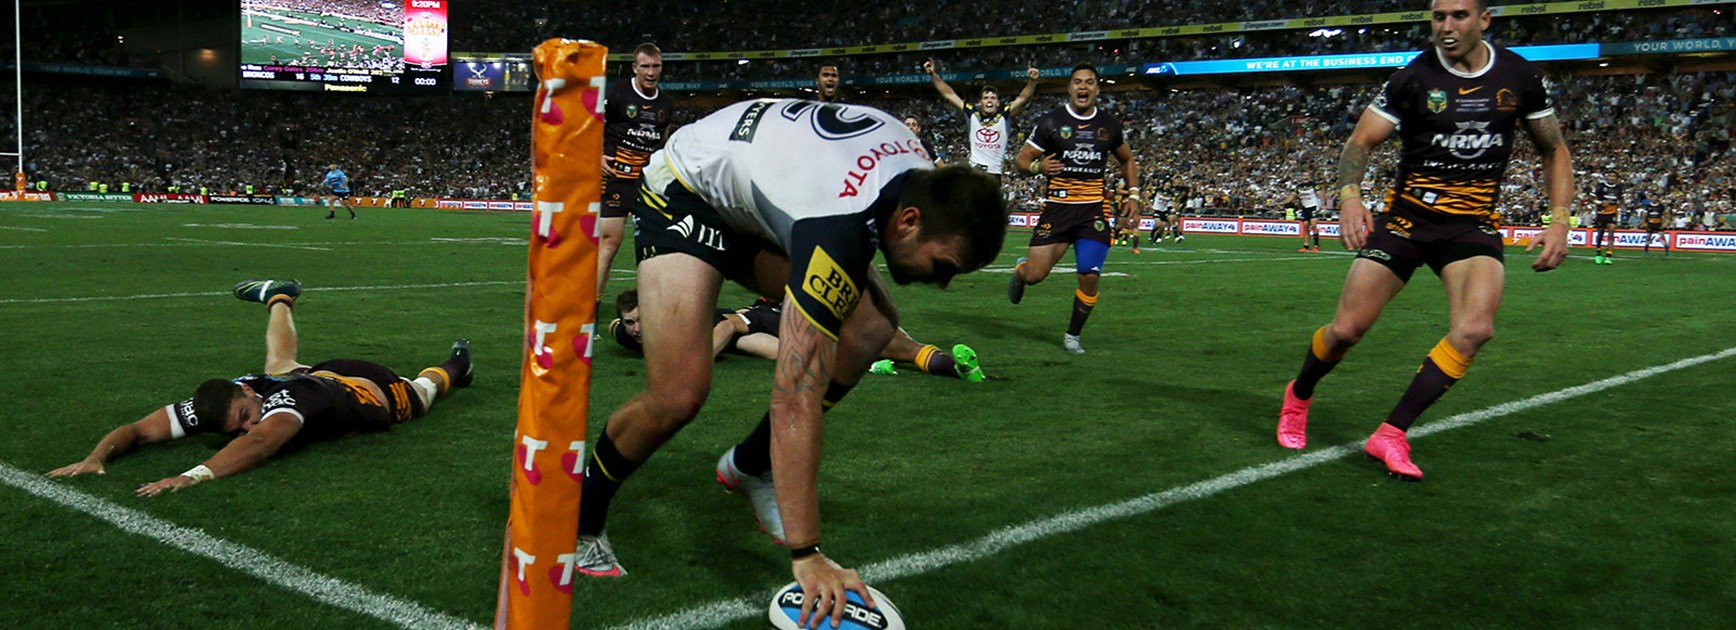 Cowboys winger Kyle Feldt scores the match-leveling try in the grand final against the Broncos.